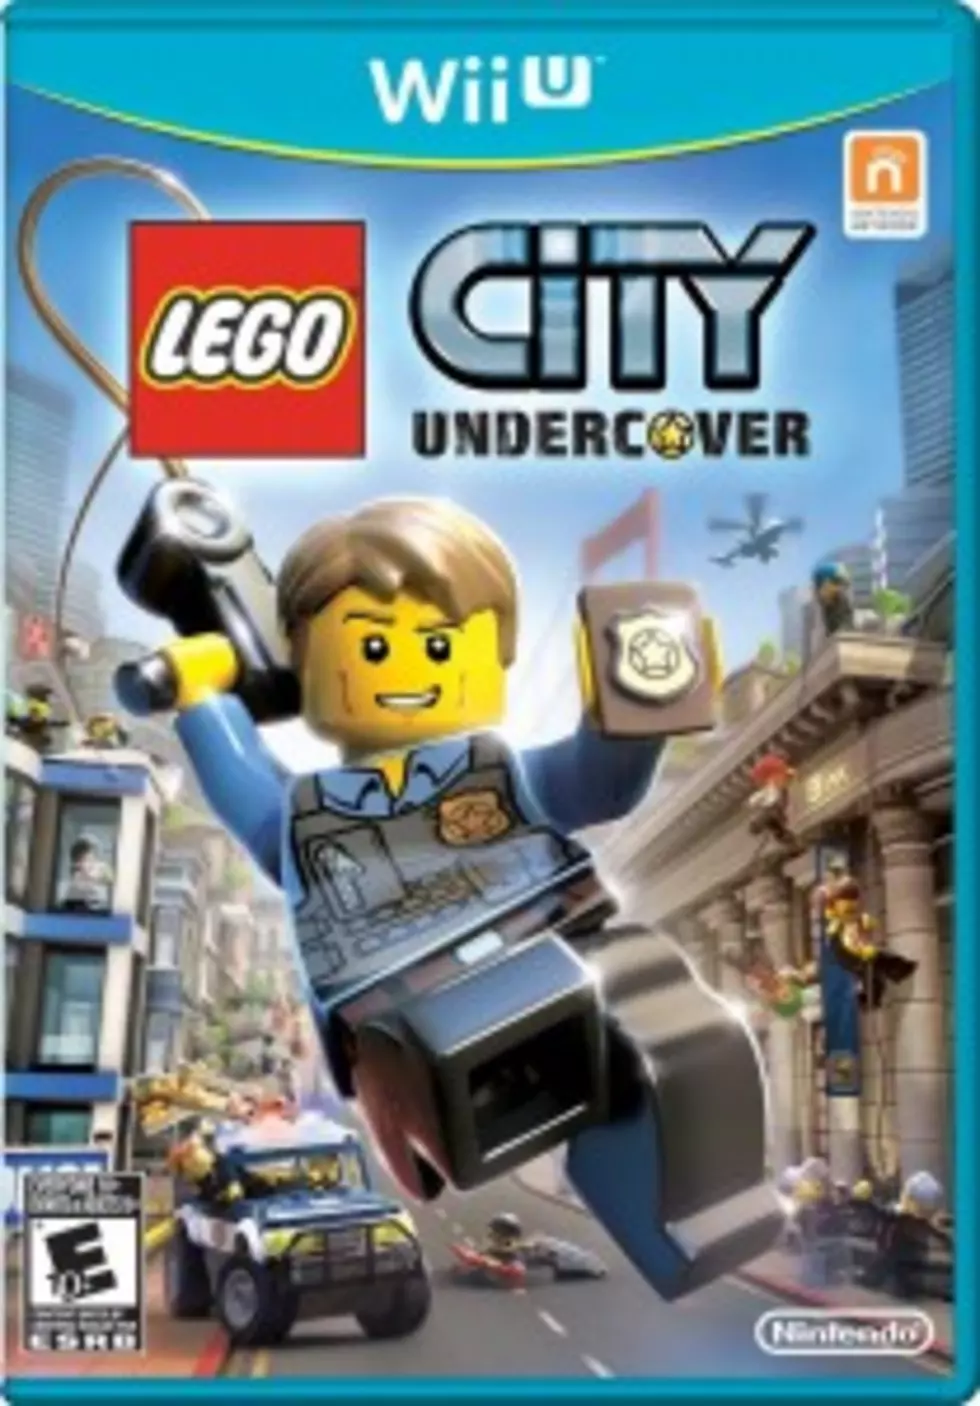 The Rob Reviews Lego City Undercover